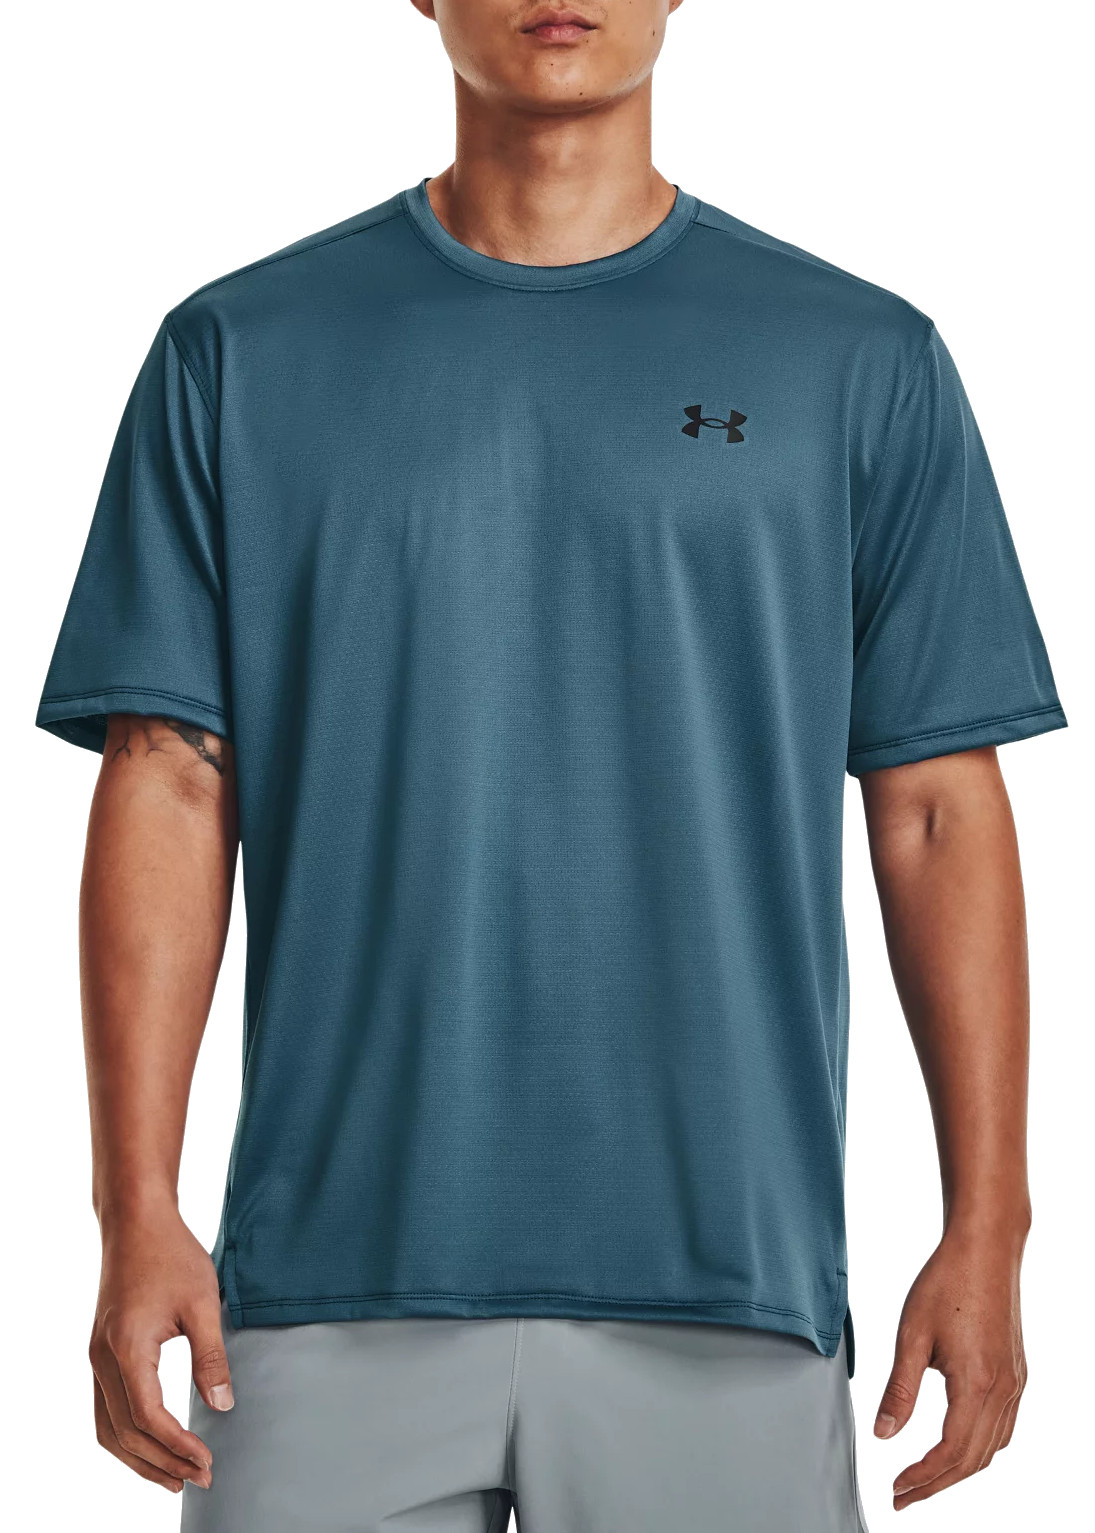 https://i1.t4s.cz/products/1376791-414/under-armour-under-armour-ua-tech-vent-594861-1376791-414.jpg